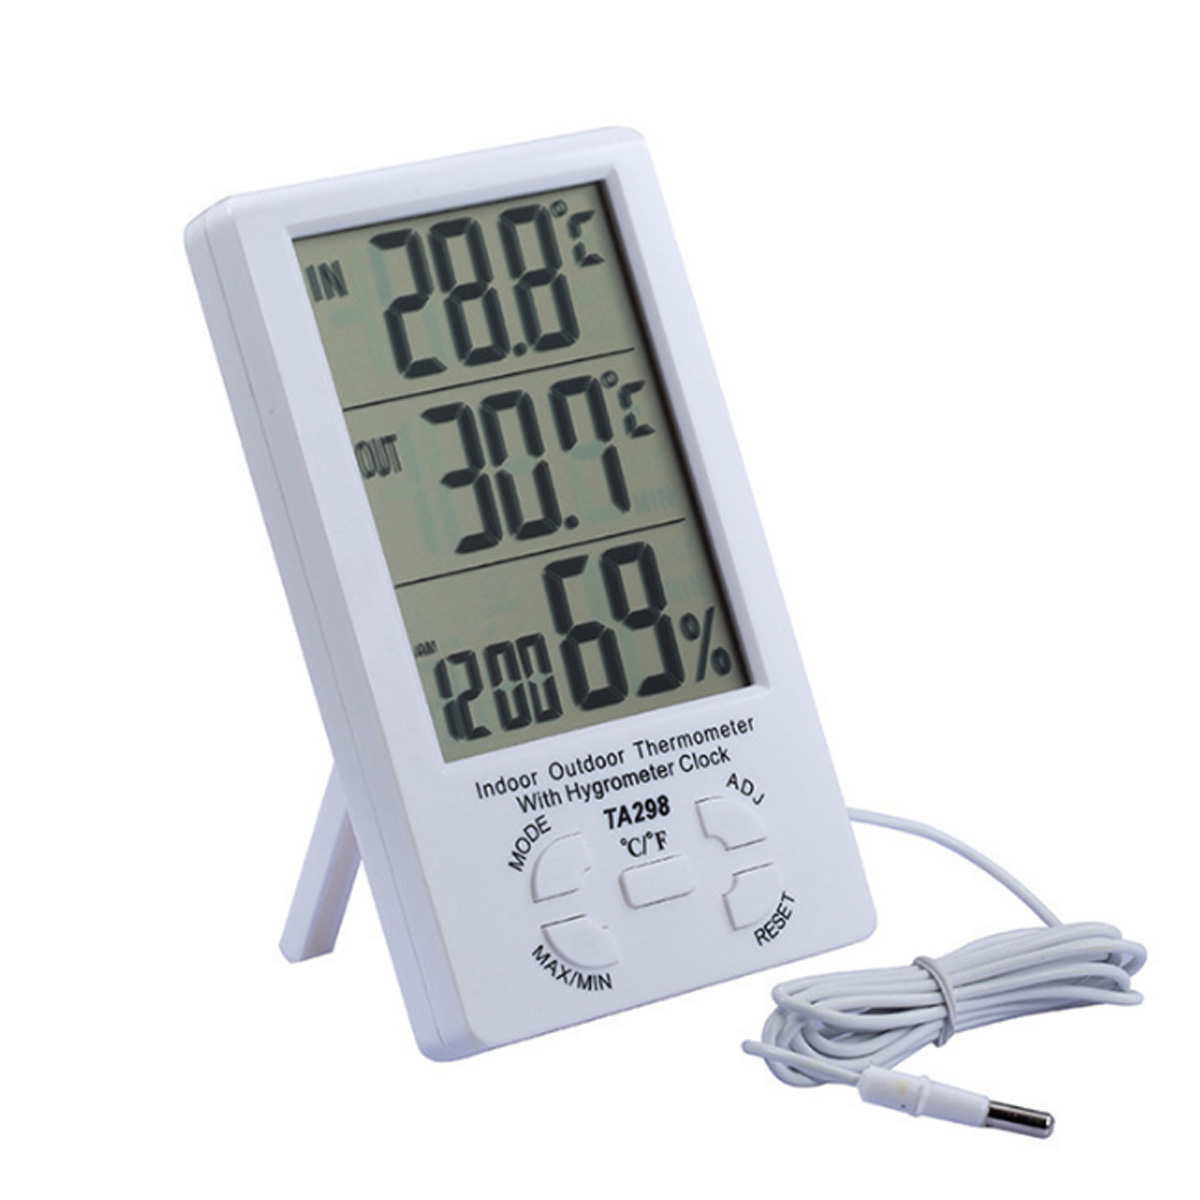 

Large Screen Thermometer Hygrometer Indoor Outdoor Digital Display Dual Temperature Display Thermometer